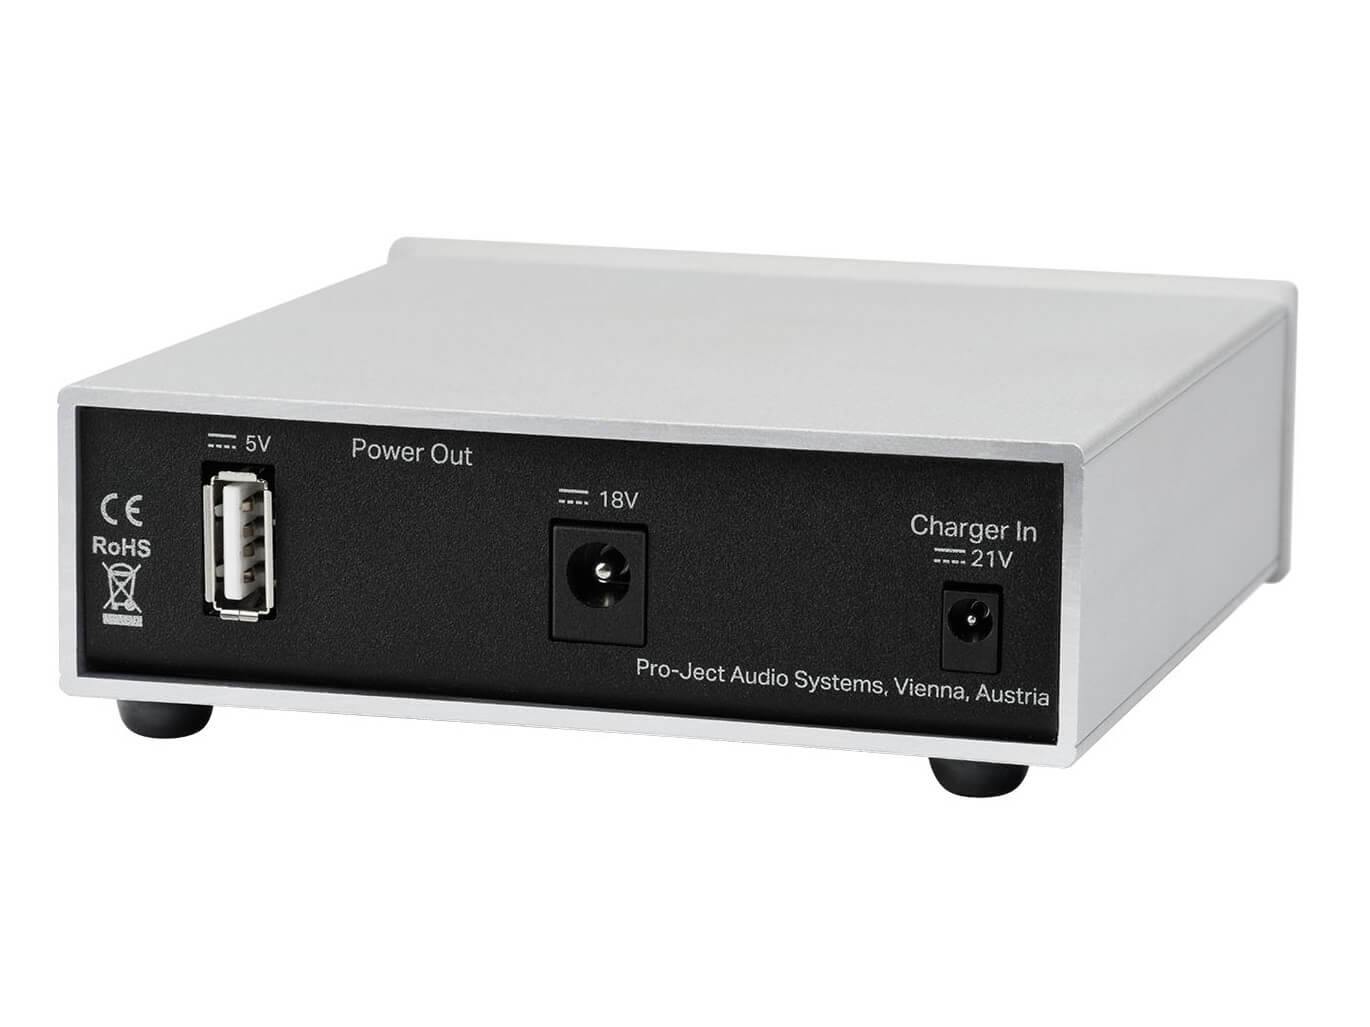 Pro-Ject Accu Box S2 - Power Suppy - Back